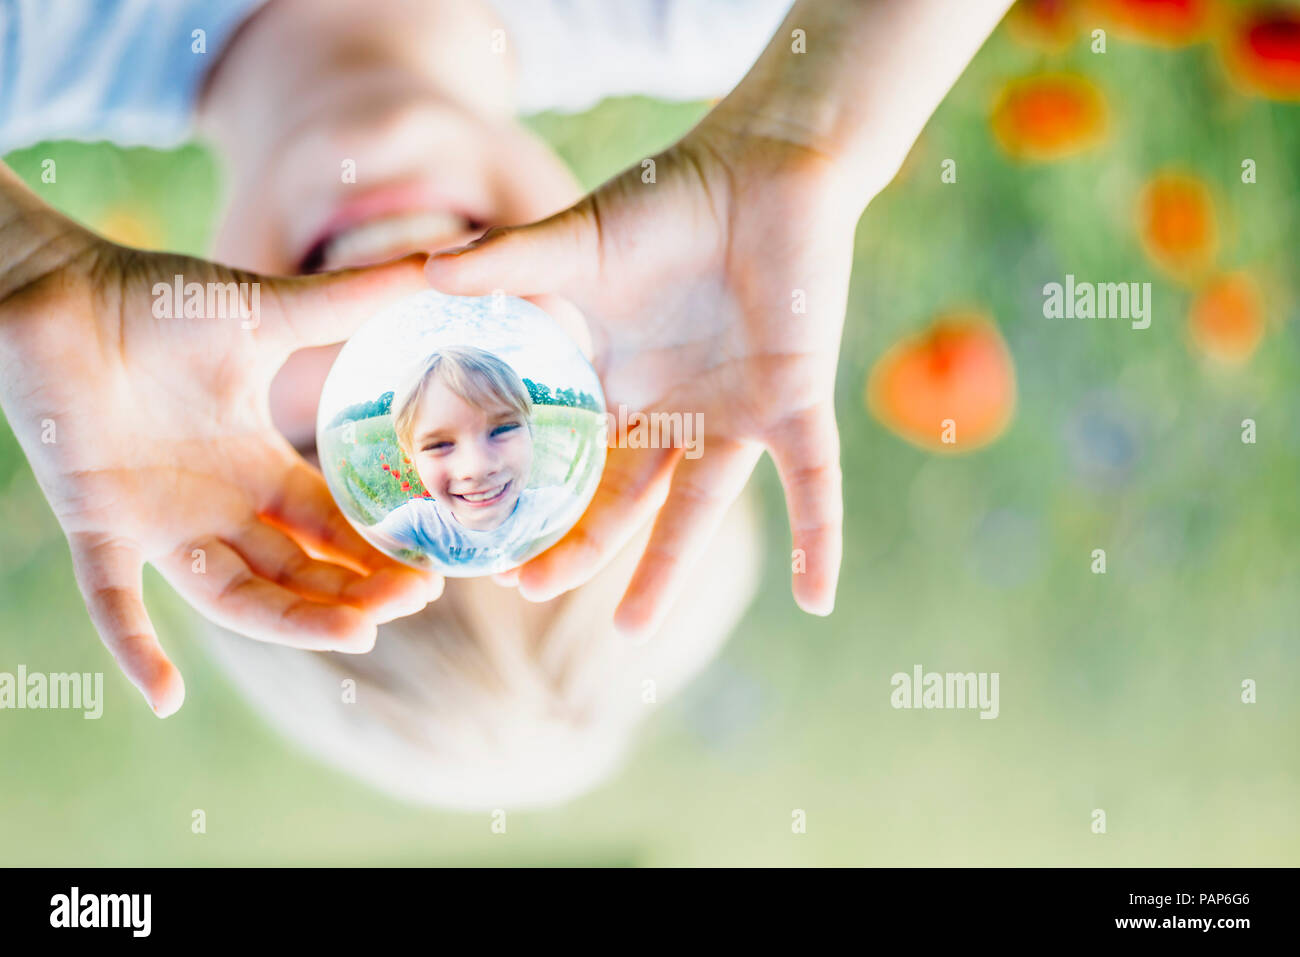 Reflection of smiling boy holding tansparent sphere in poppy field Stock Photo